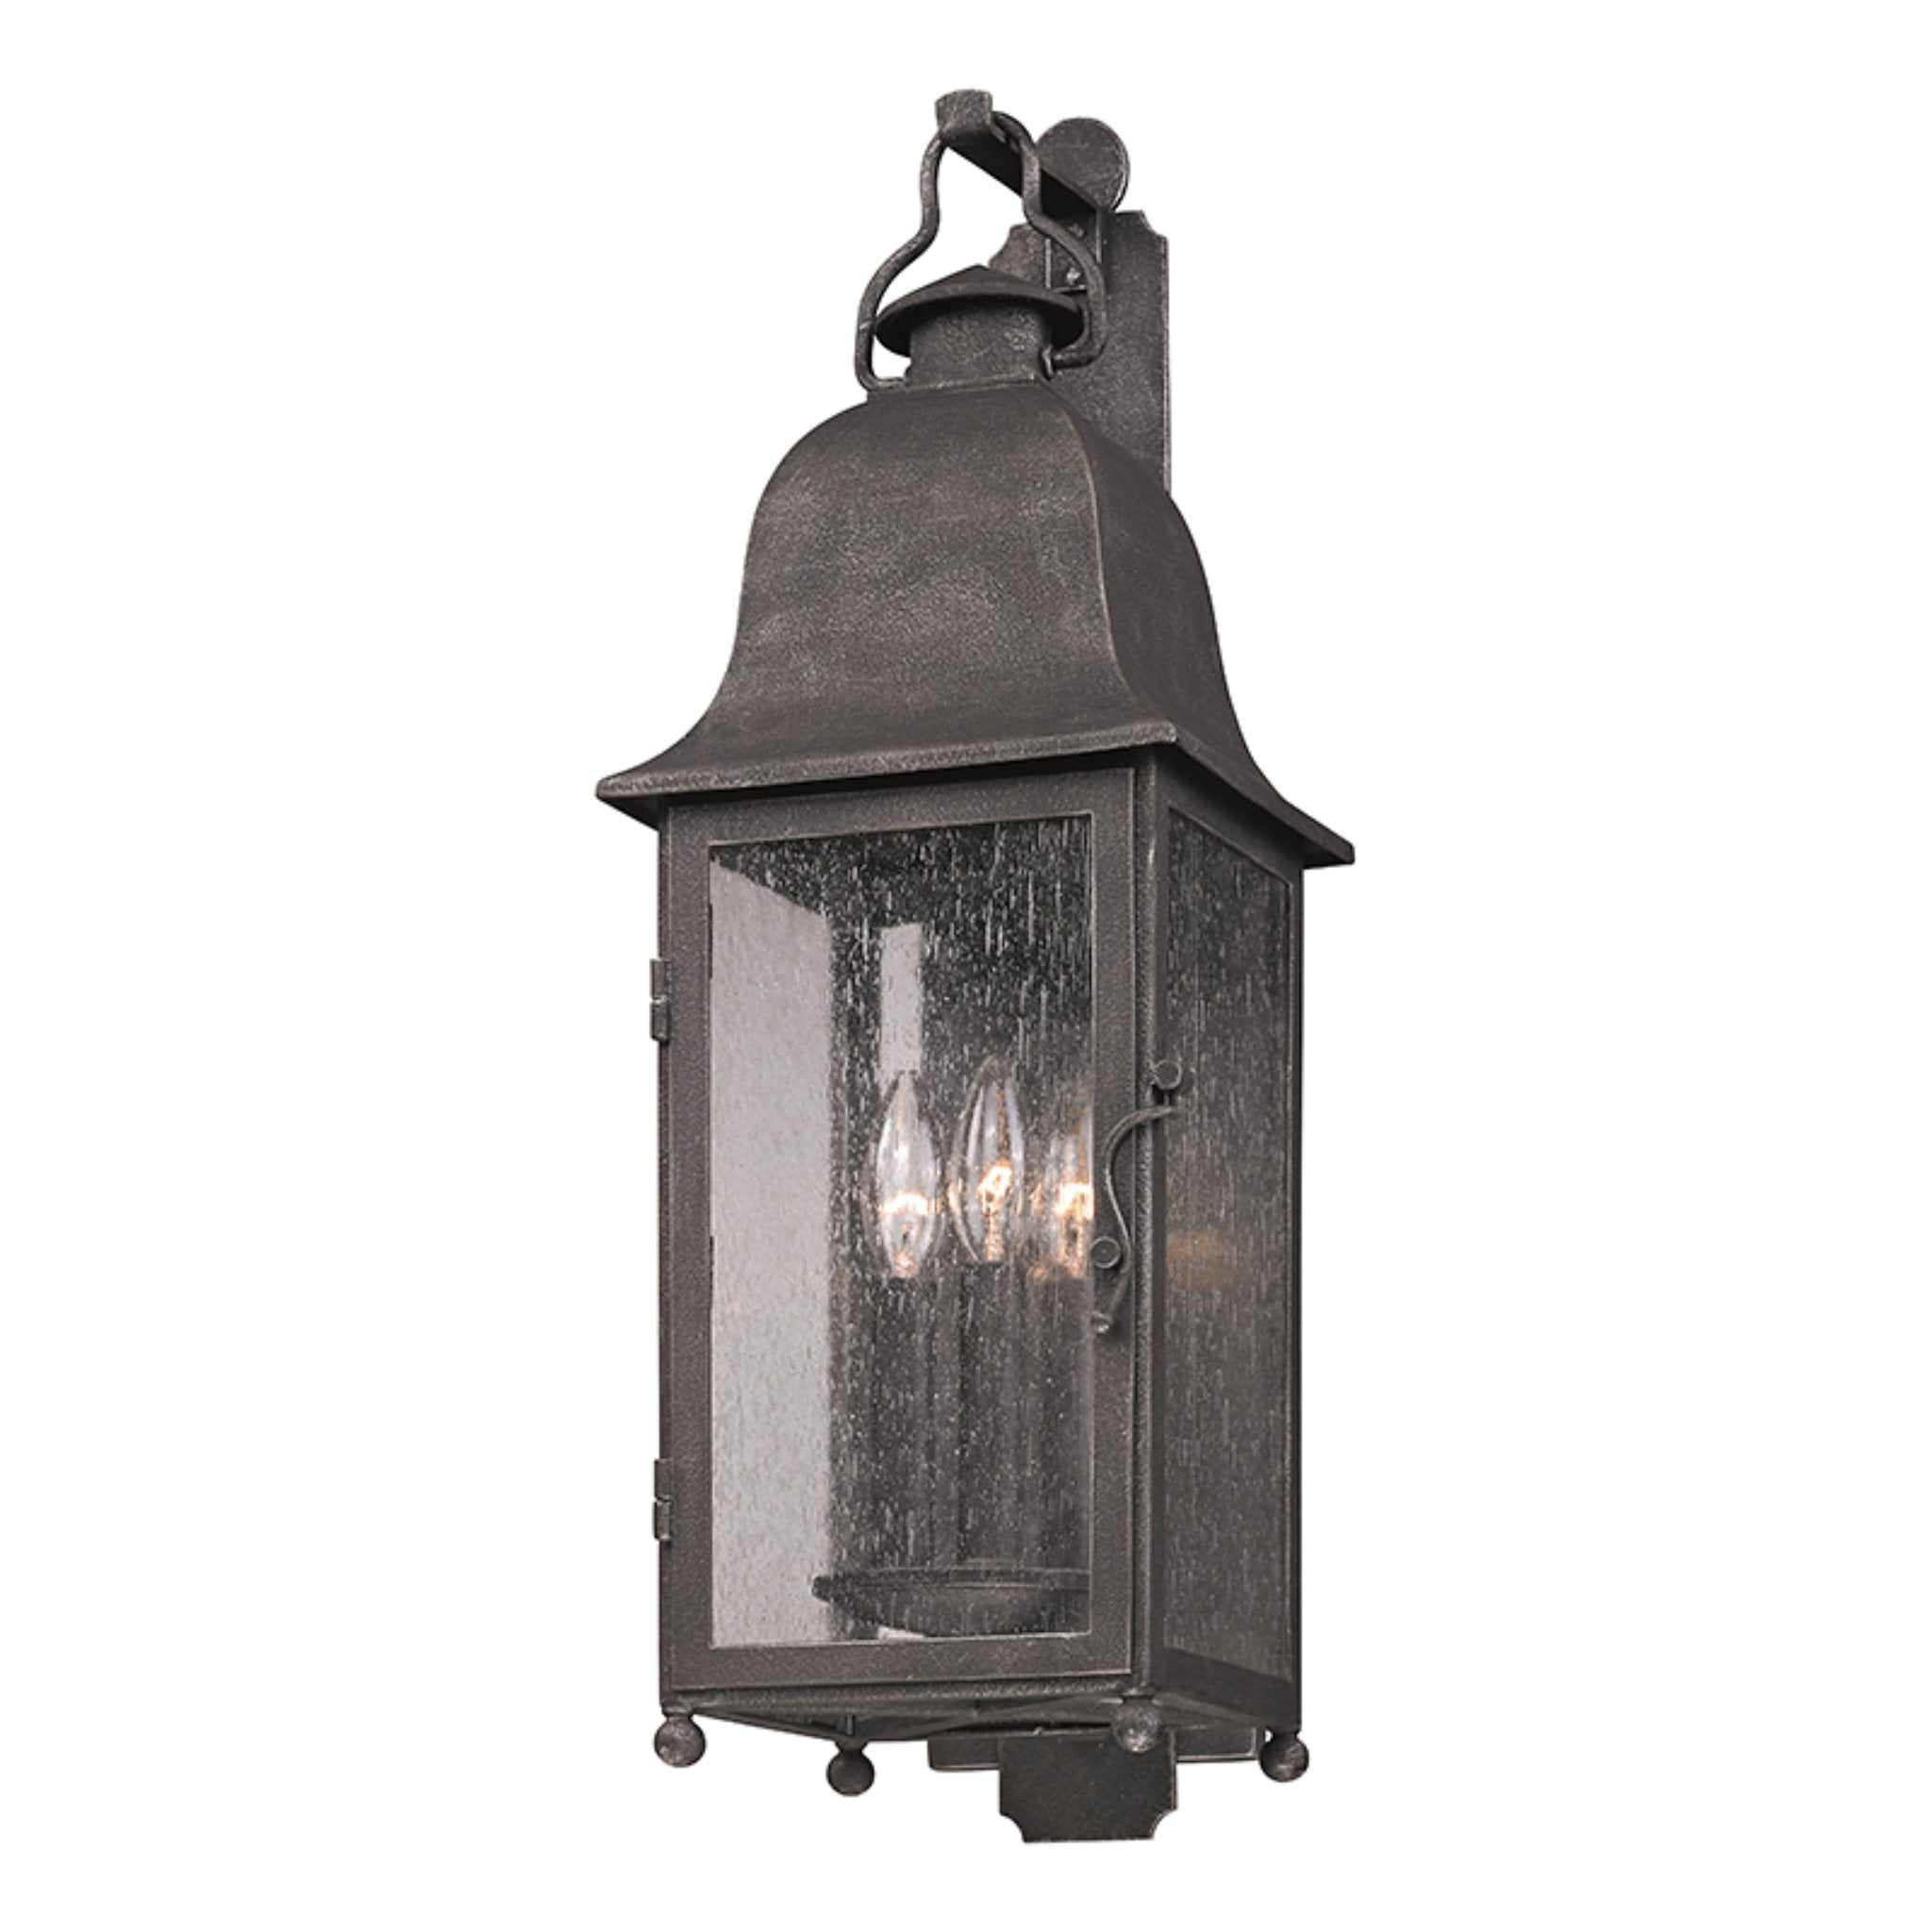 Larchmont 3 Light Wall Sconce in Vintage Bronze